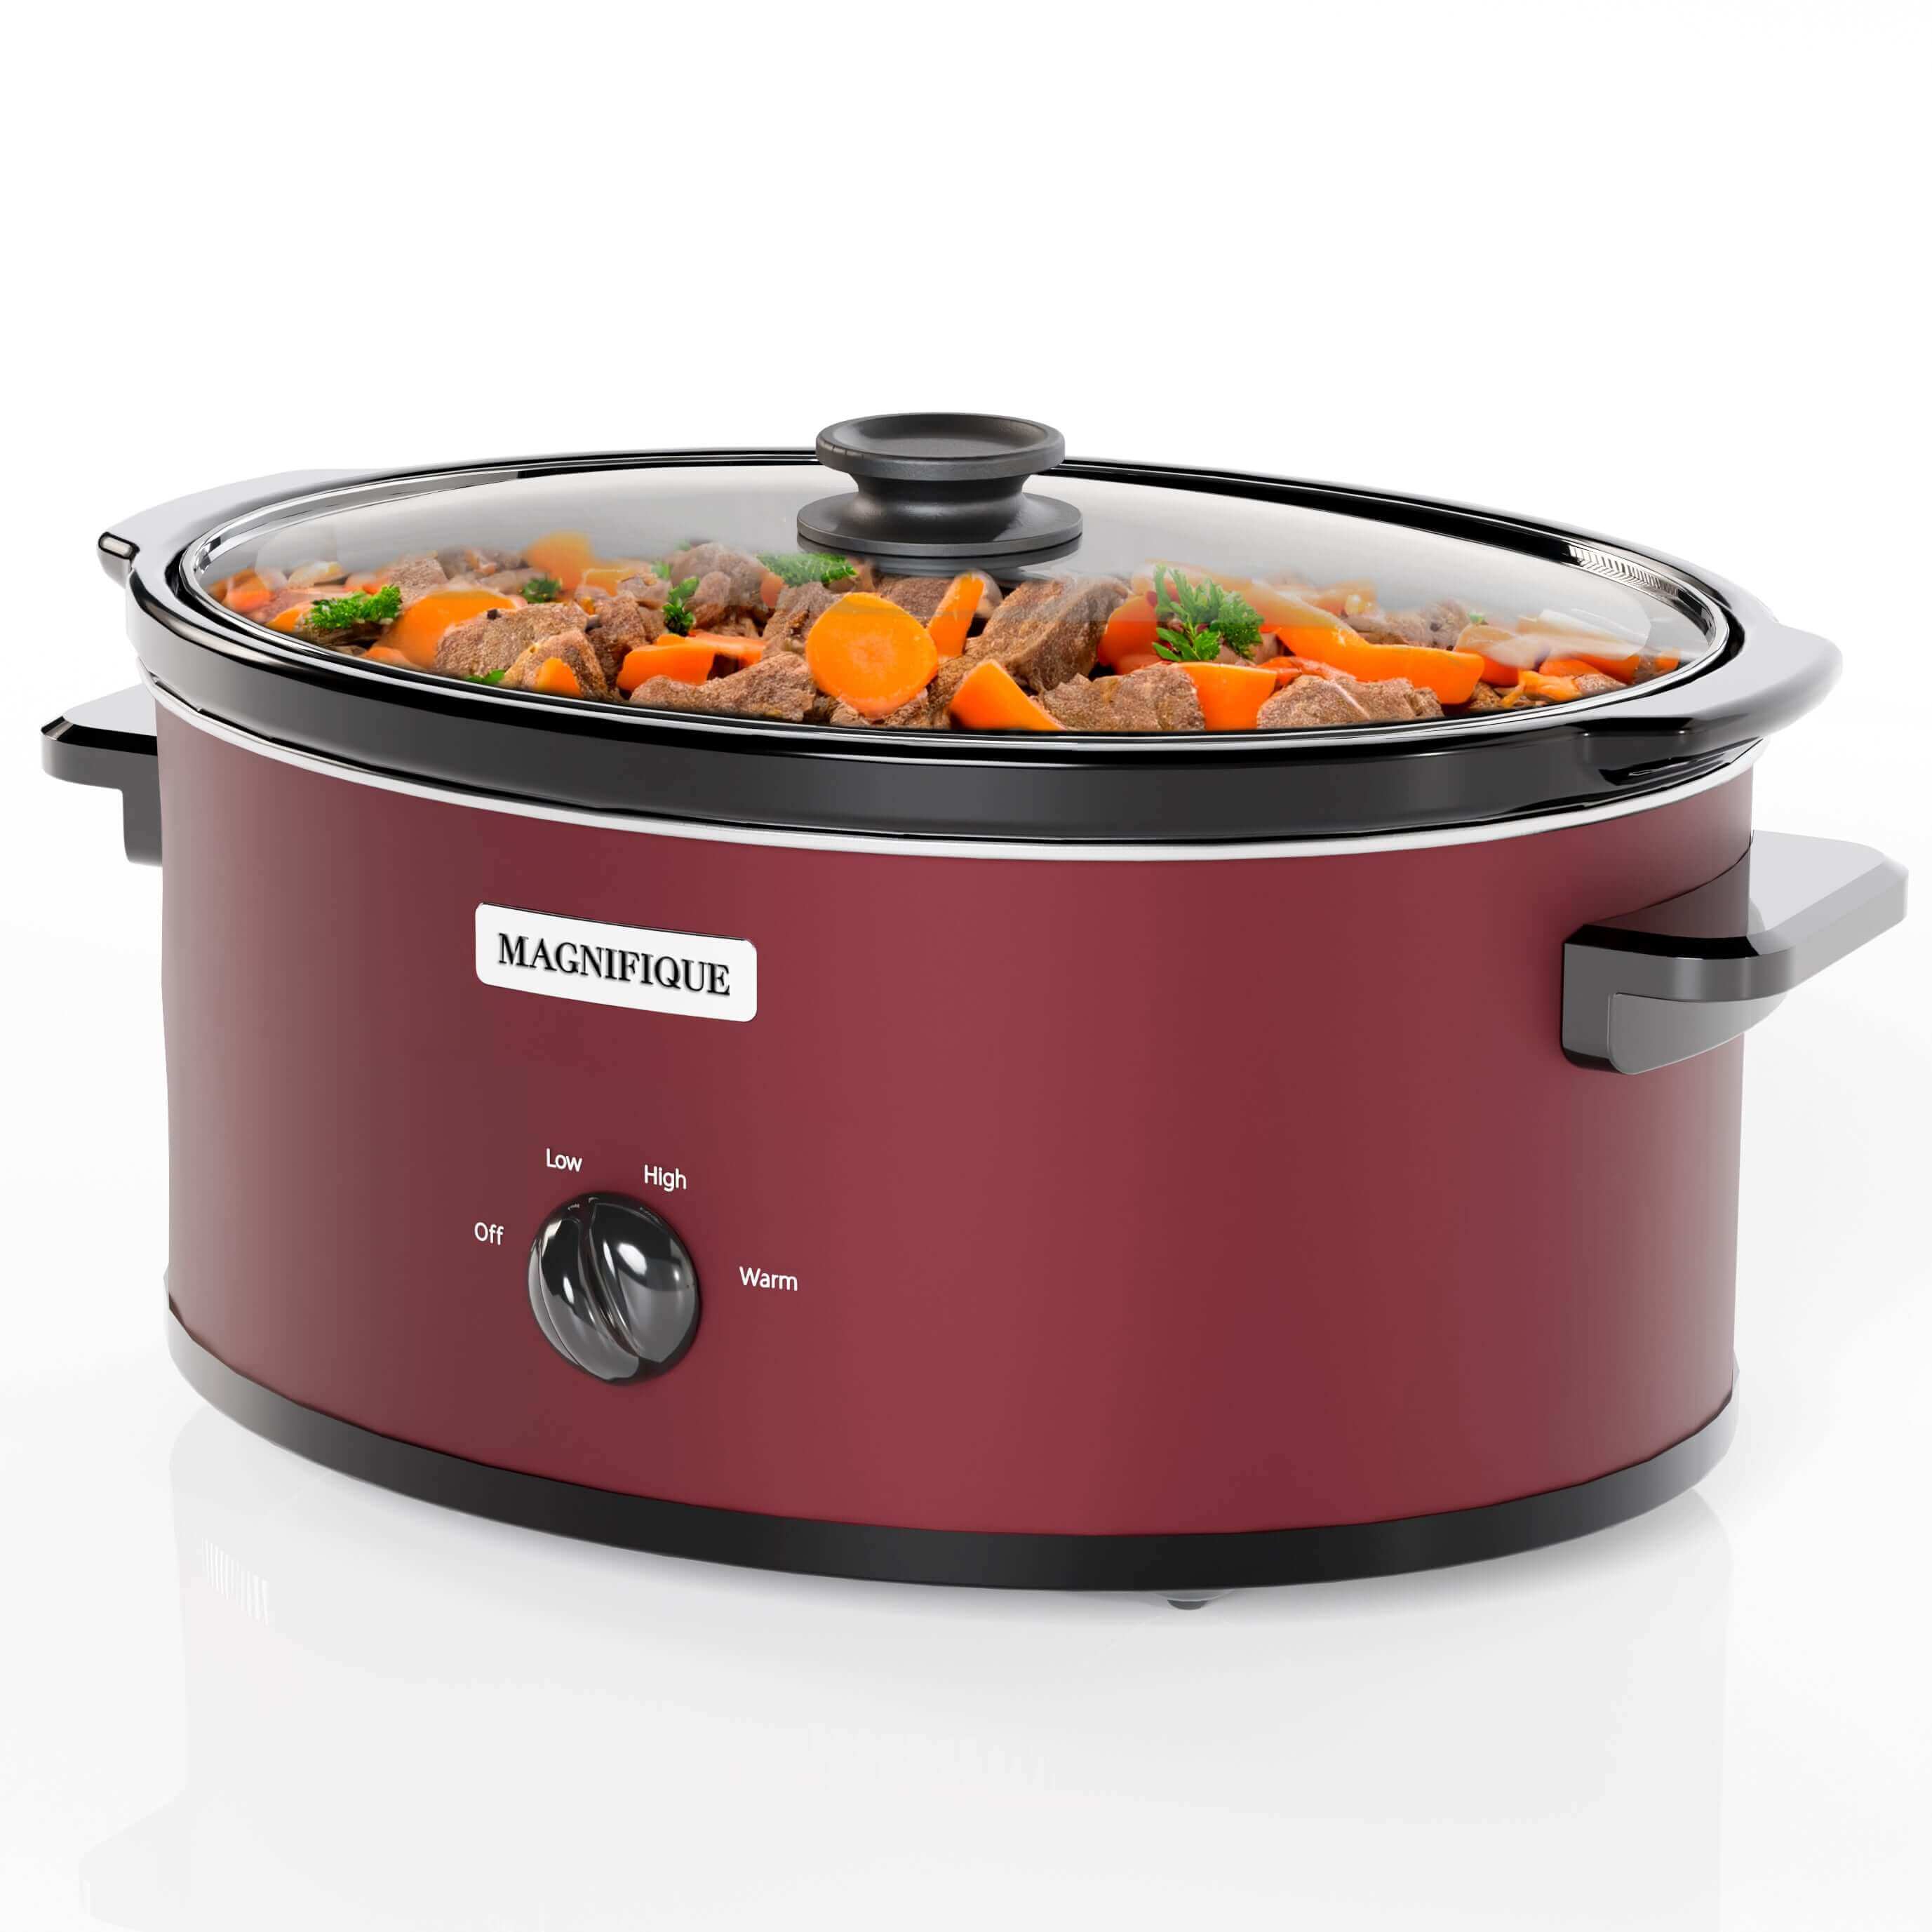 4 Quart Oval Slow Cooker- FREE SHIPPING!!!